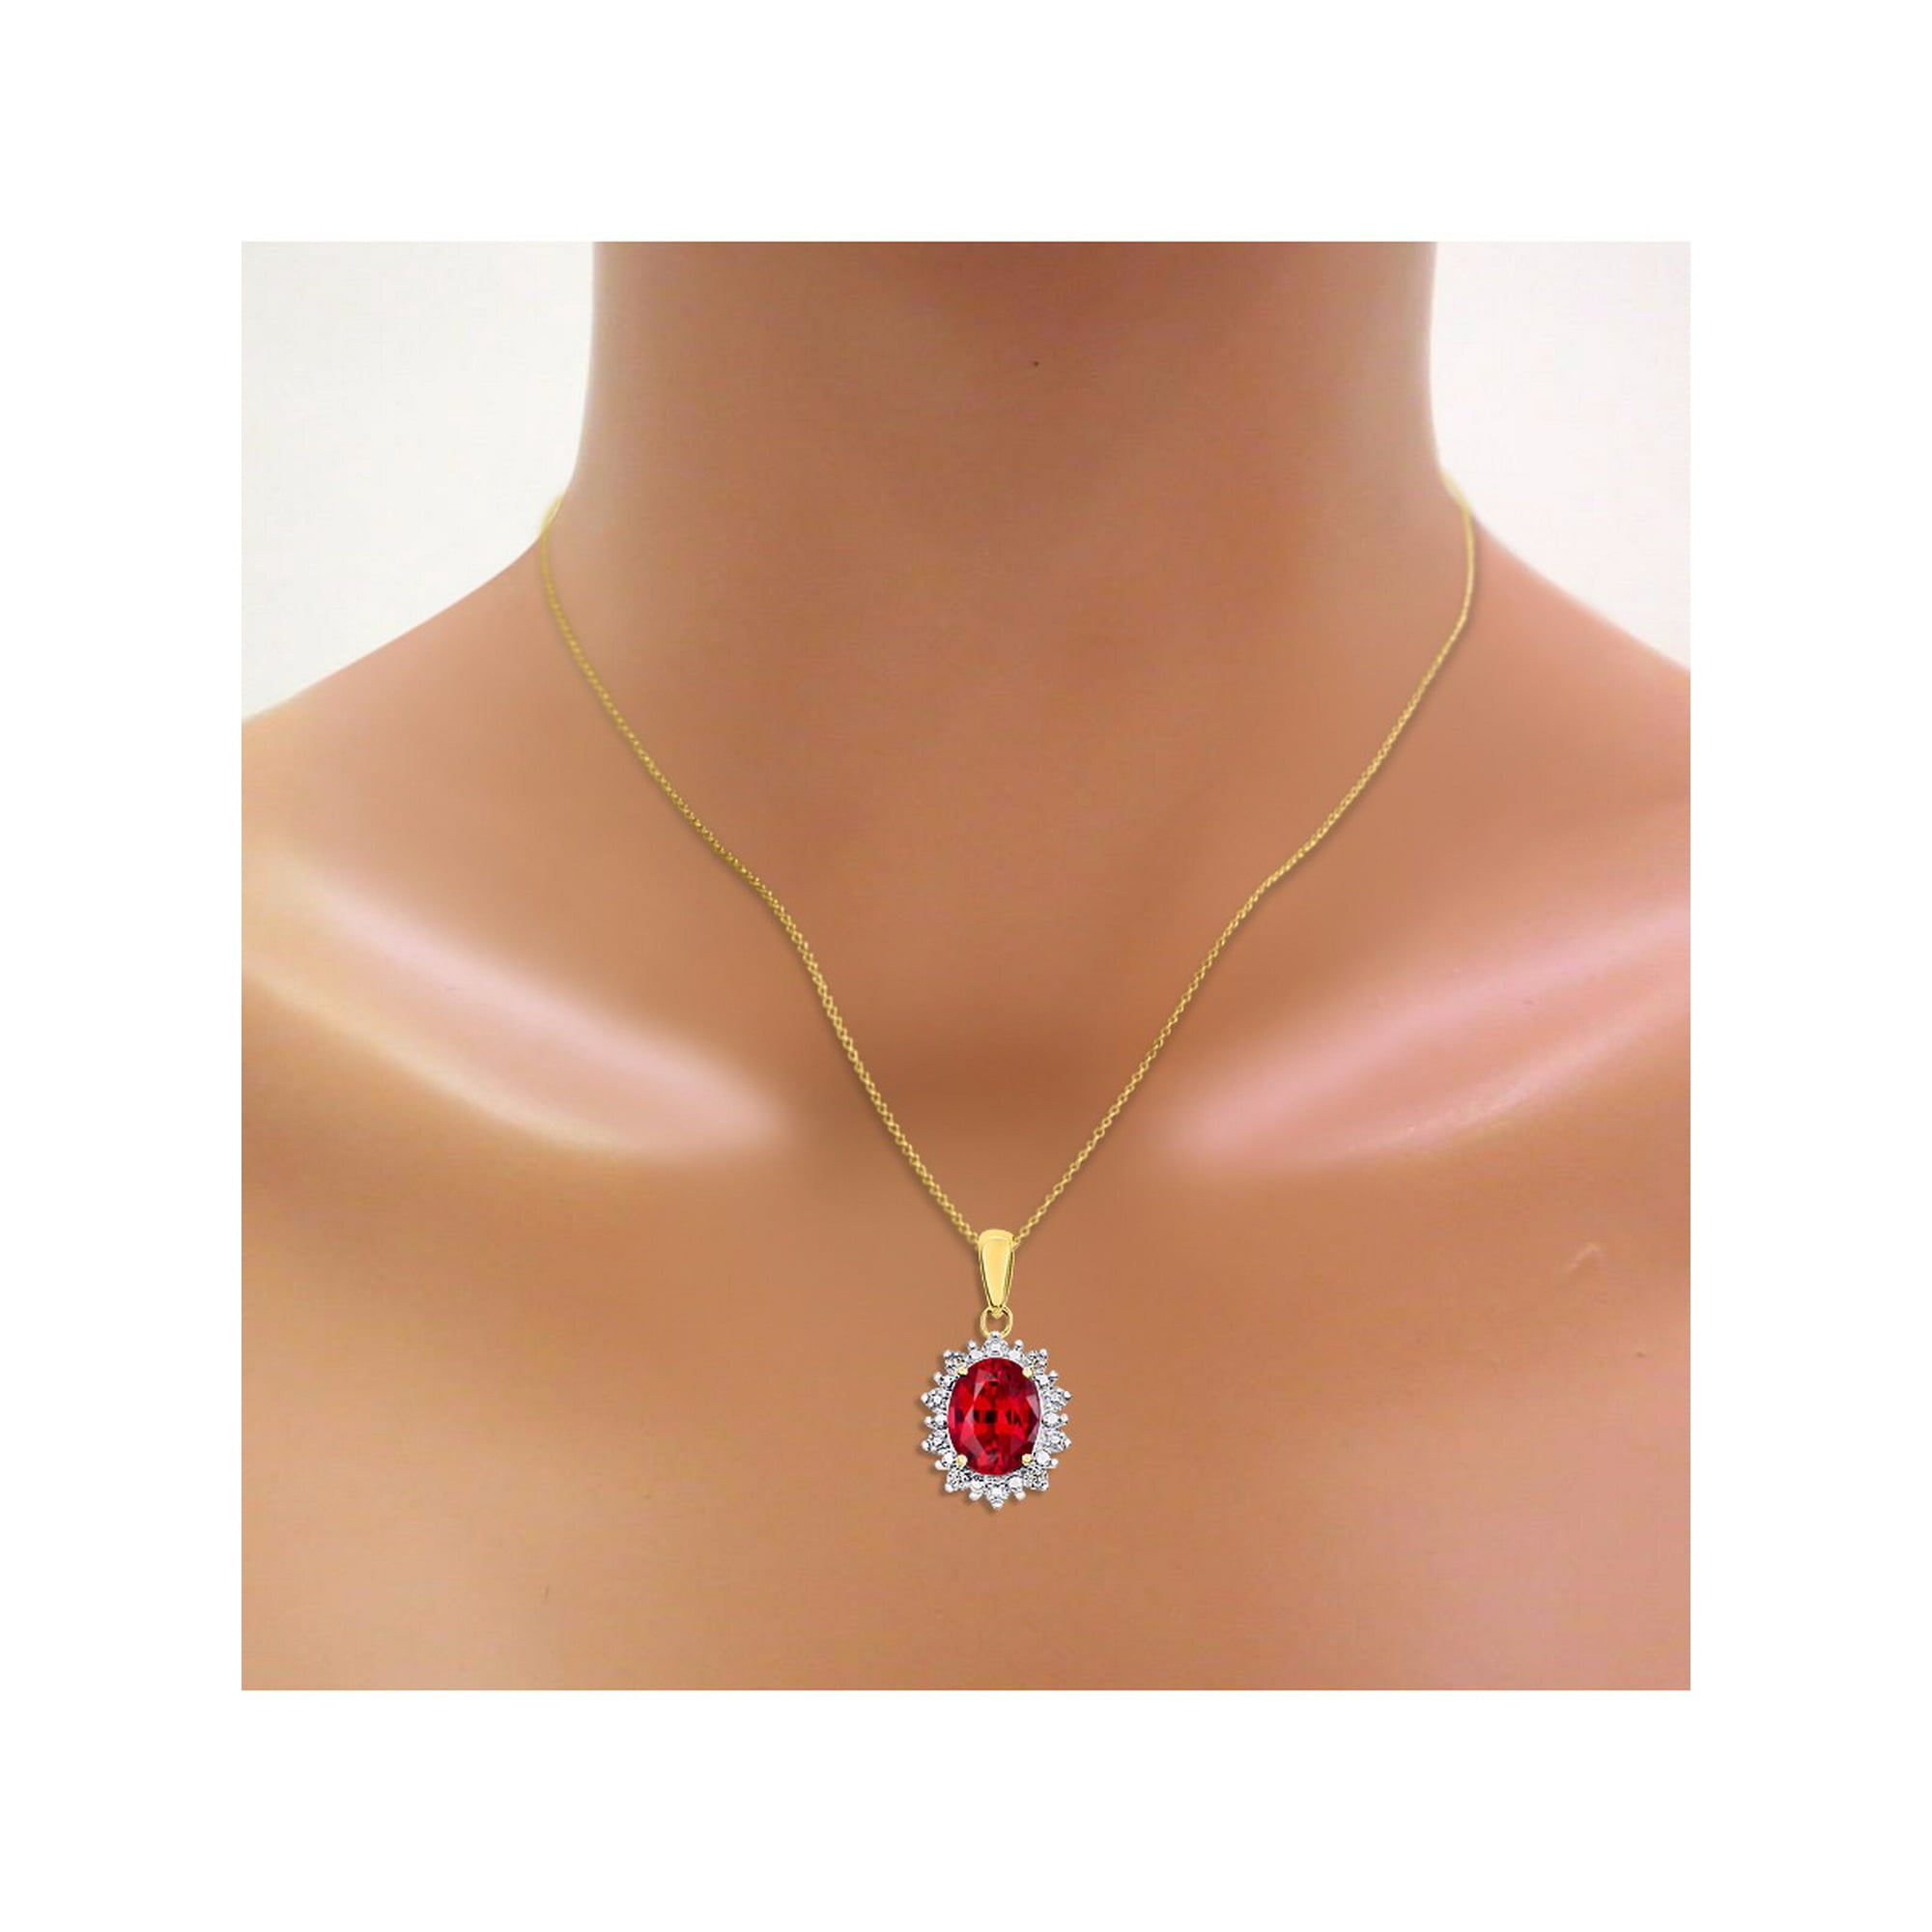 Princess Diana Inspired Halo Diamond & Ruby Pendant Necklace Set In Set in  14K Yellow Gold With 18 Chain LP4781RY-E 